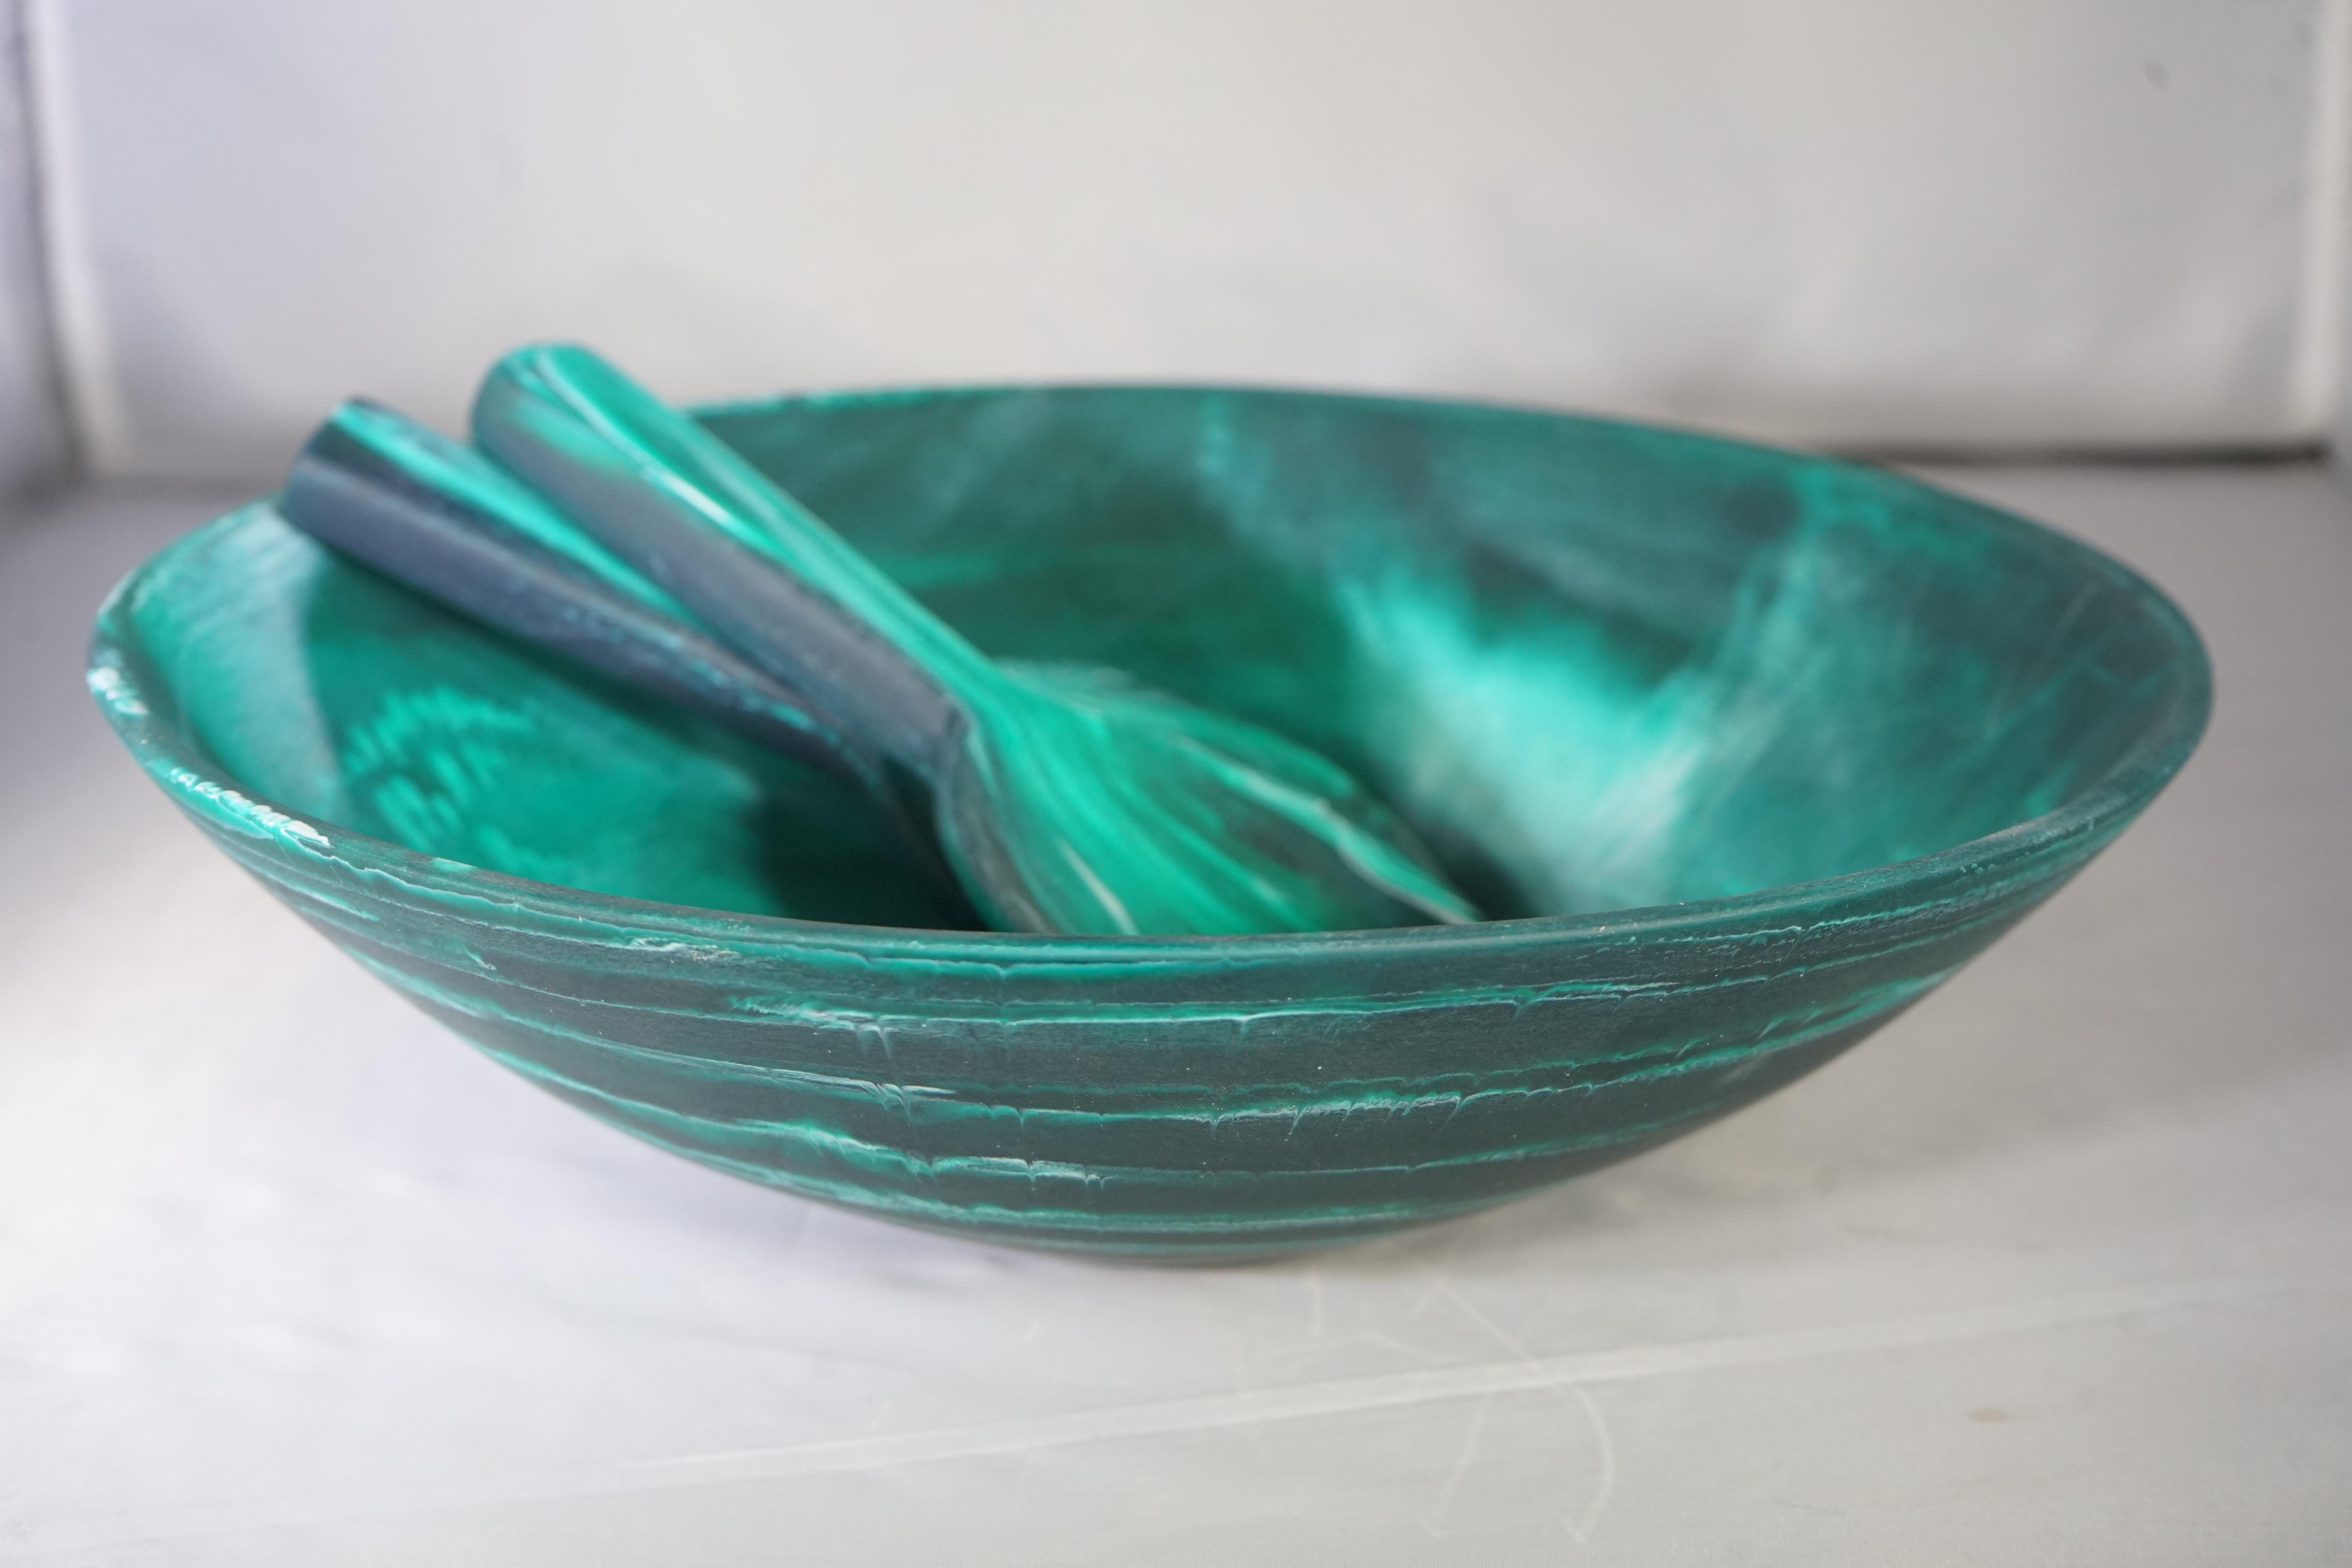 North American Contemporary CDMX Design Green and White Resin Salad Bowl Serving Set